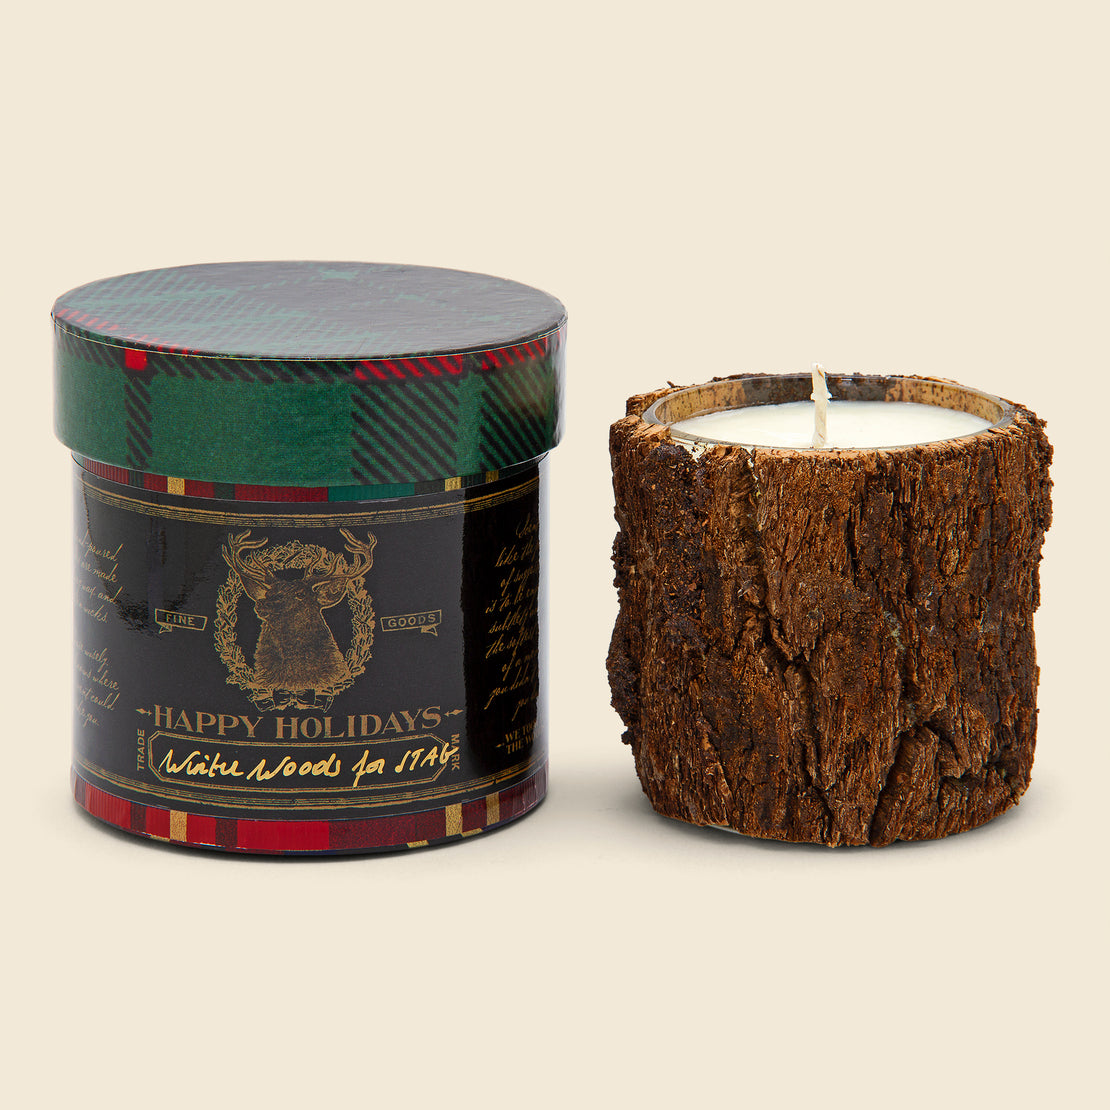 We Took To The Woods Candle 8.5oz - Winter Woods for STAG